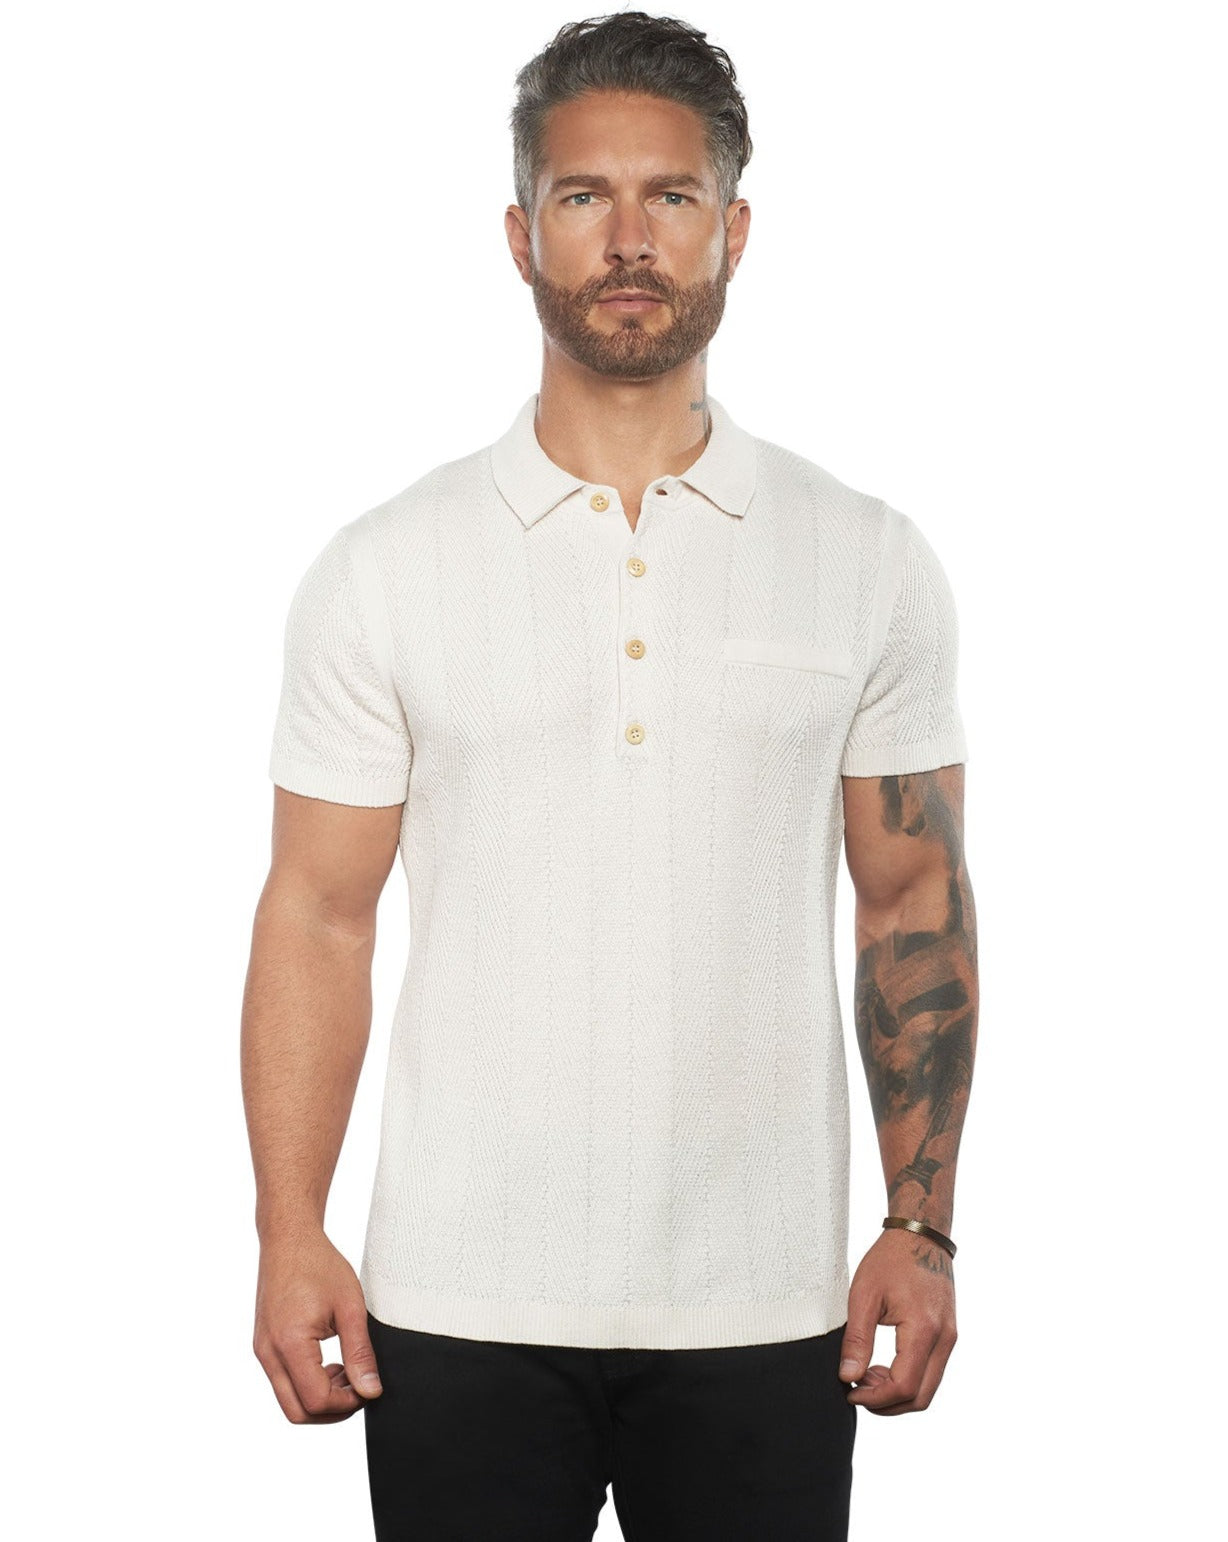 The Alastair Slim Fit Knit Polo